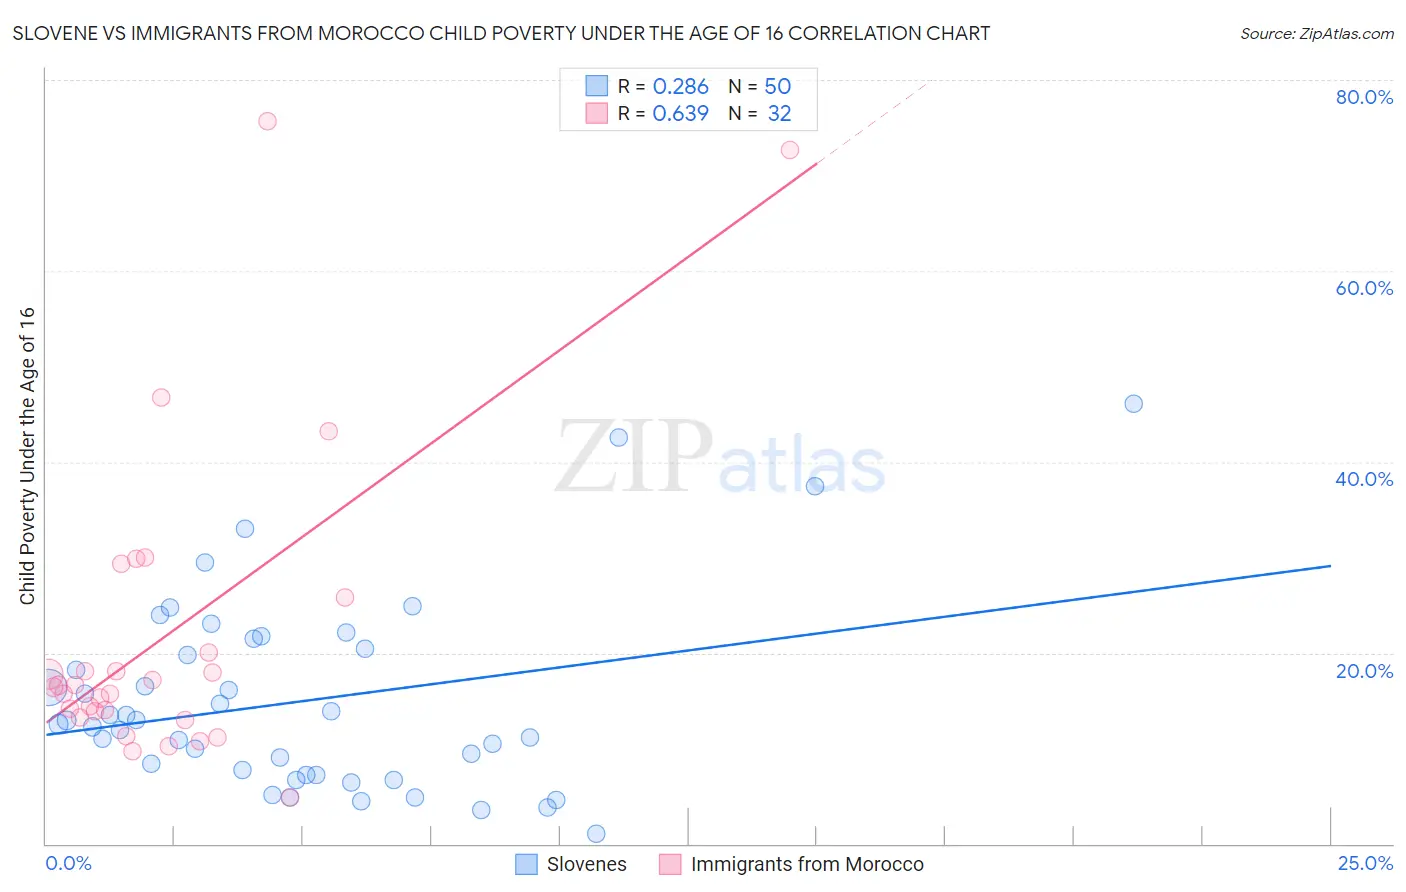 Slovene vs Immigrants from Morocco Child Poverty Under the Age of 16